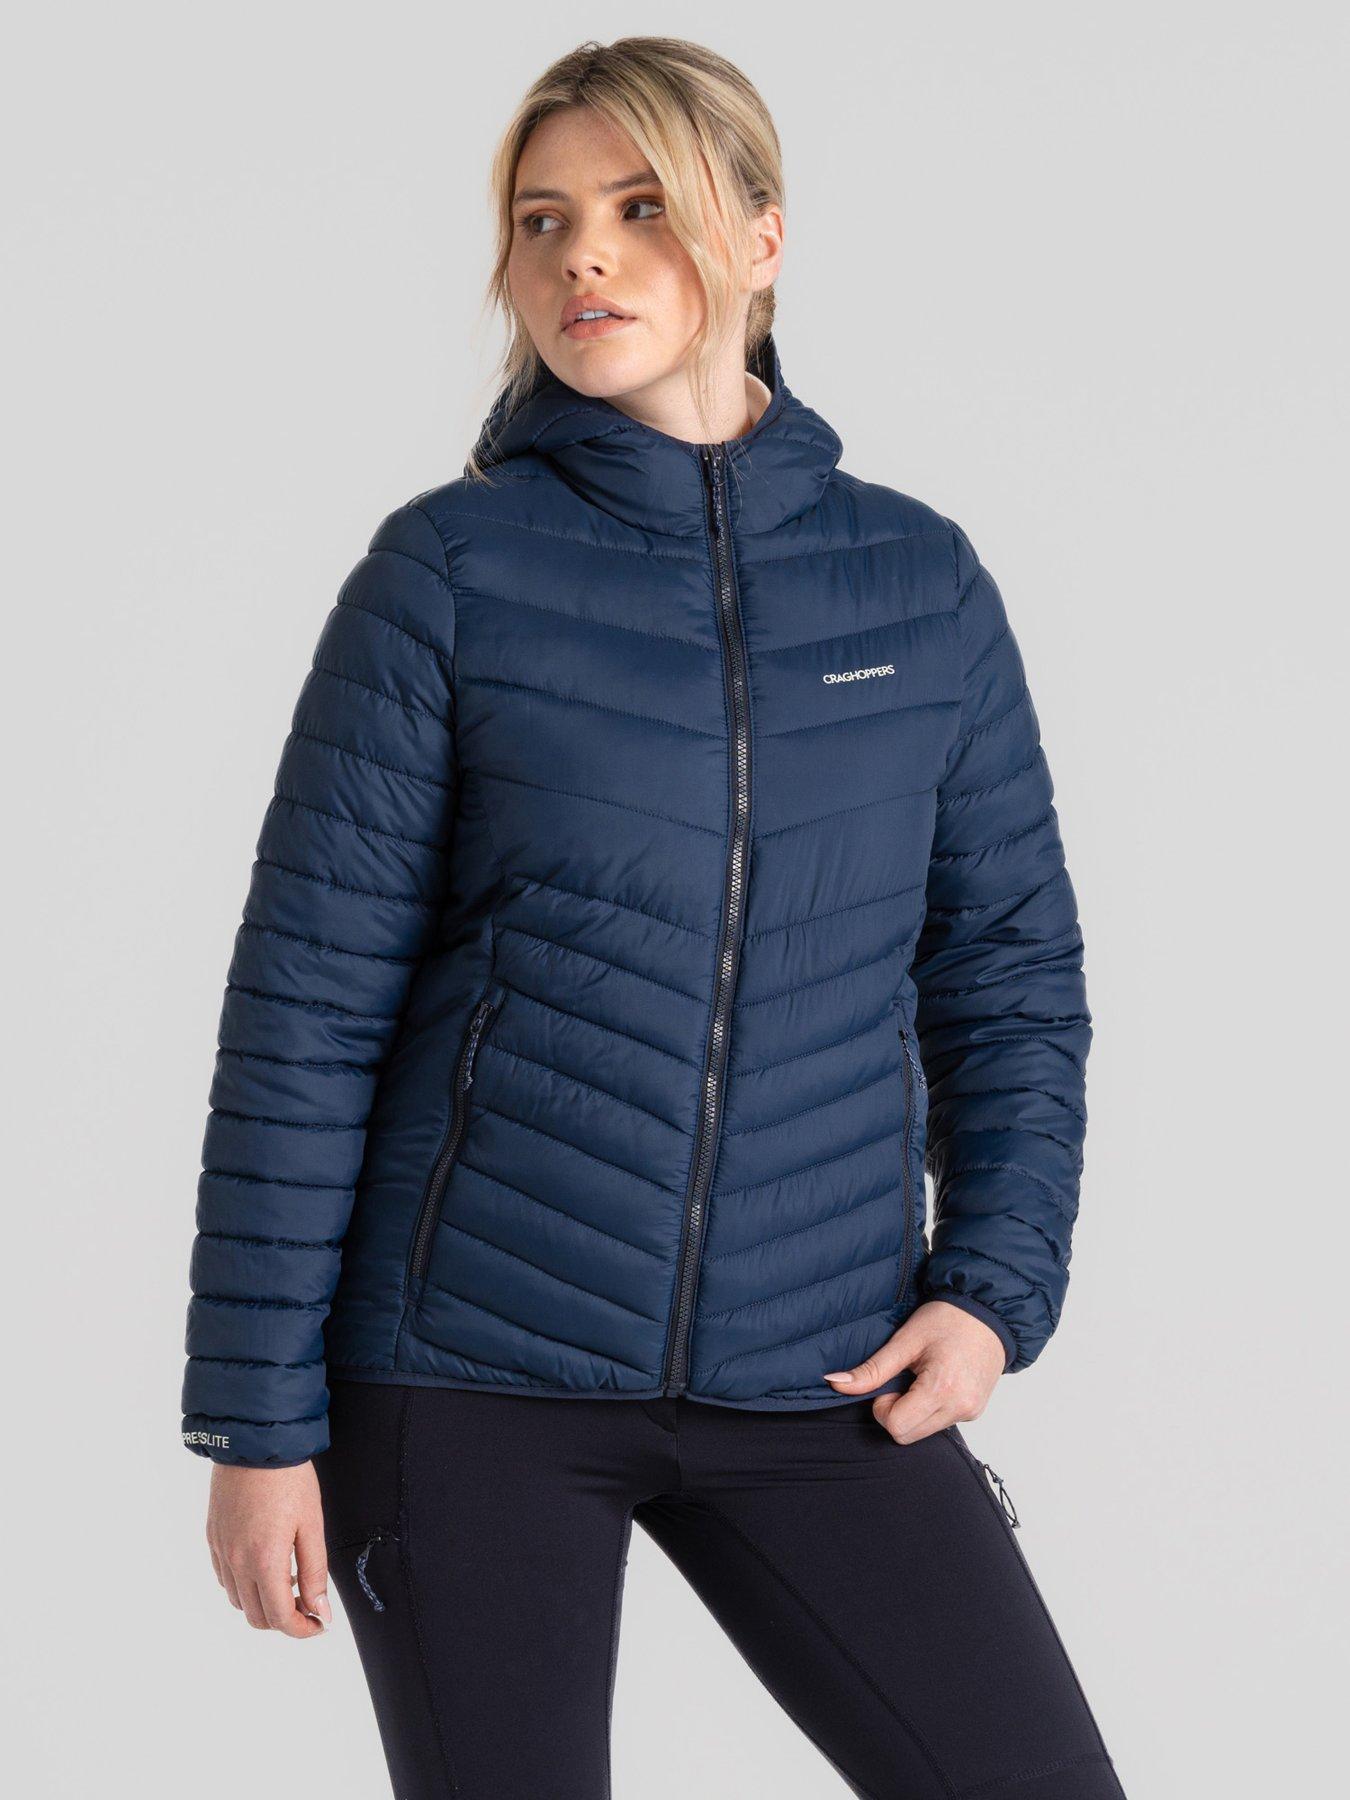 Craghoppers Women's Jackets: Sale, Clearance & Outlet